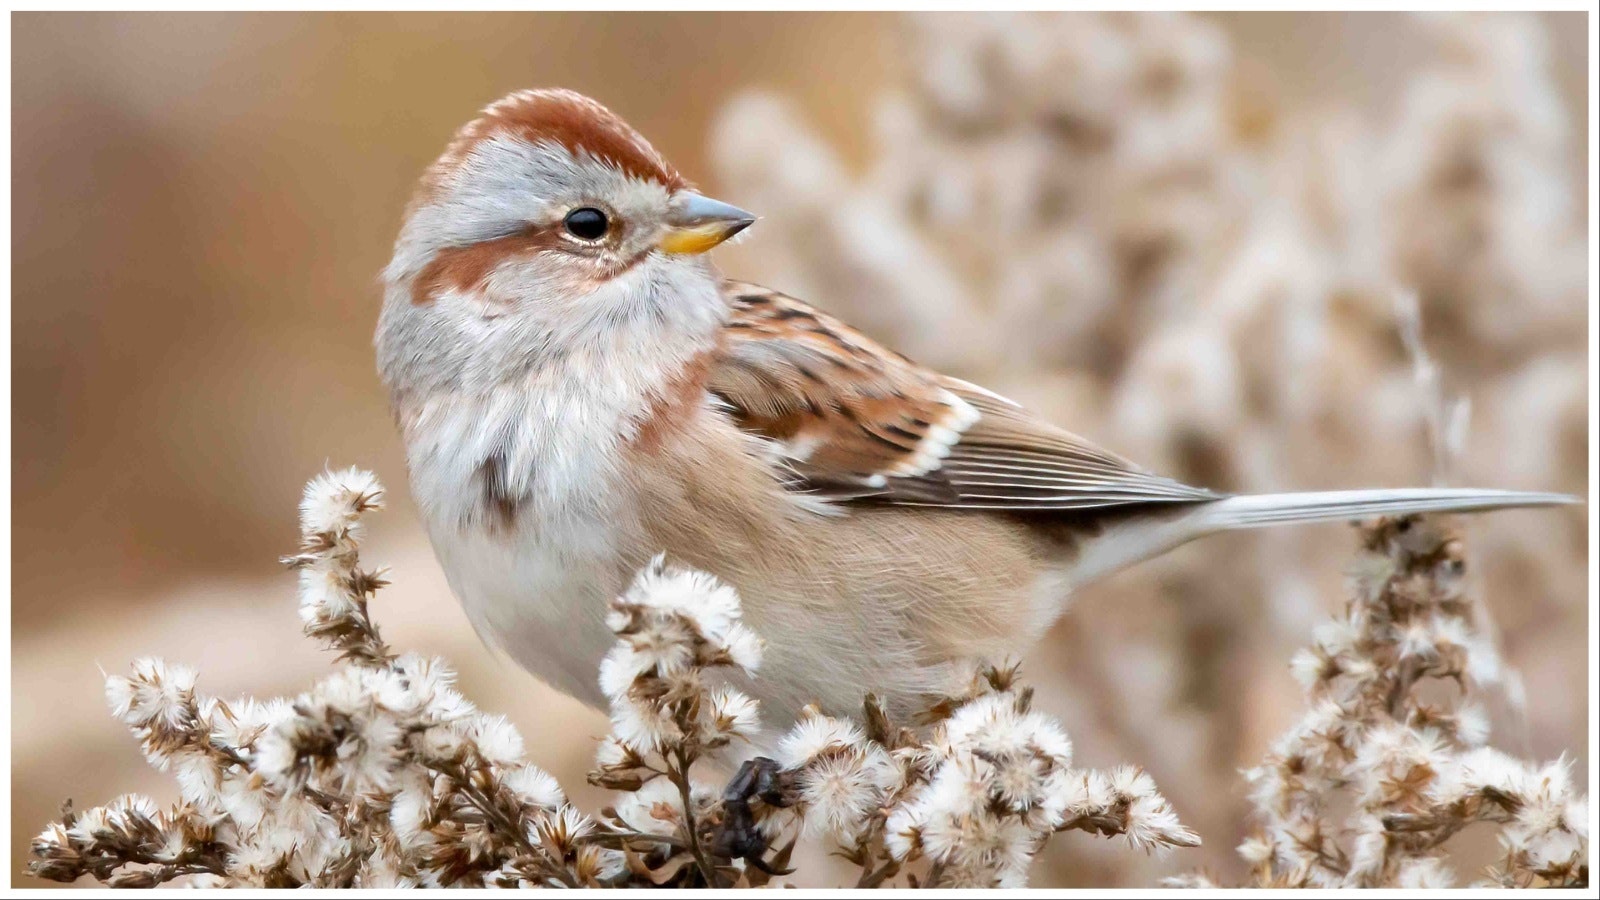 When Wyoming birders searched for American tree sparrows and Rough-legged hawks this year, the birds were scarce. Enthusiasts are blaming the warmer winter.